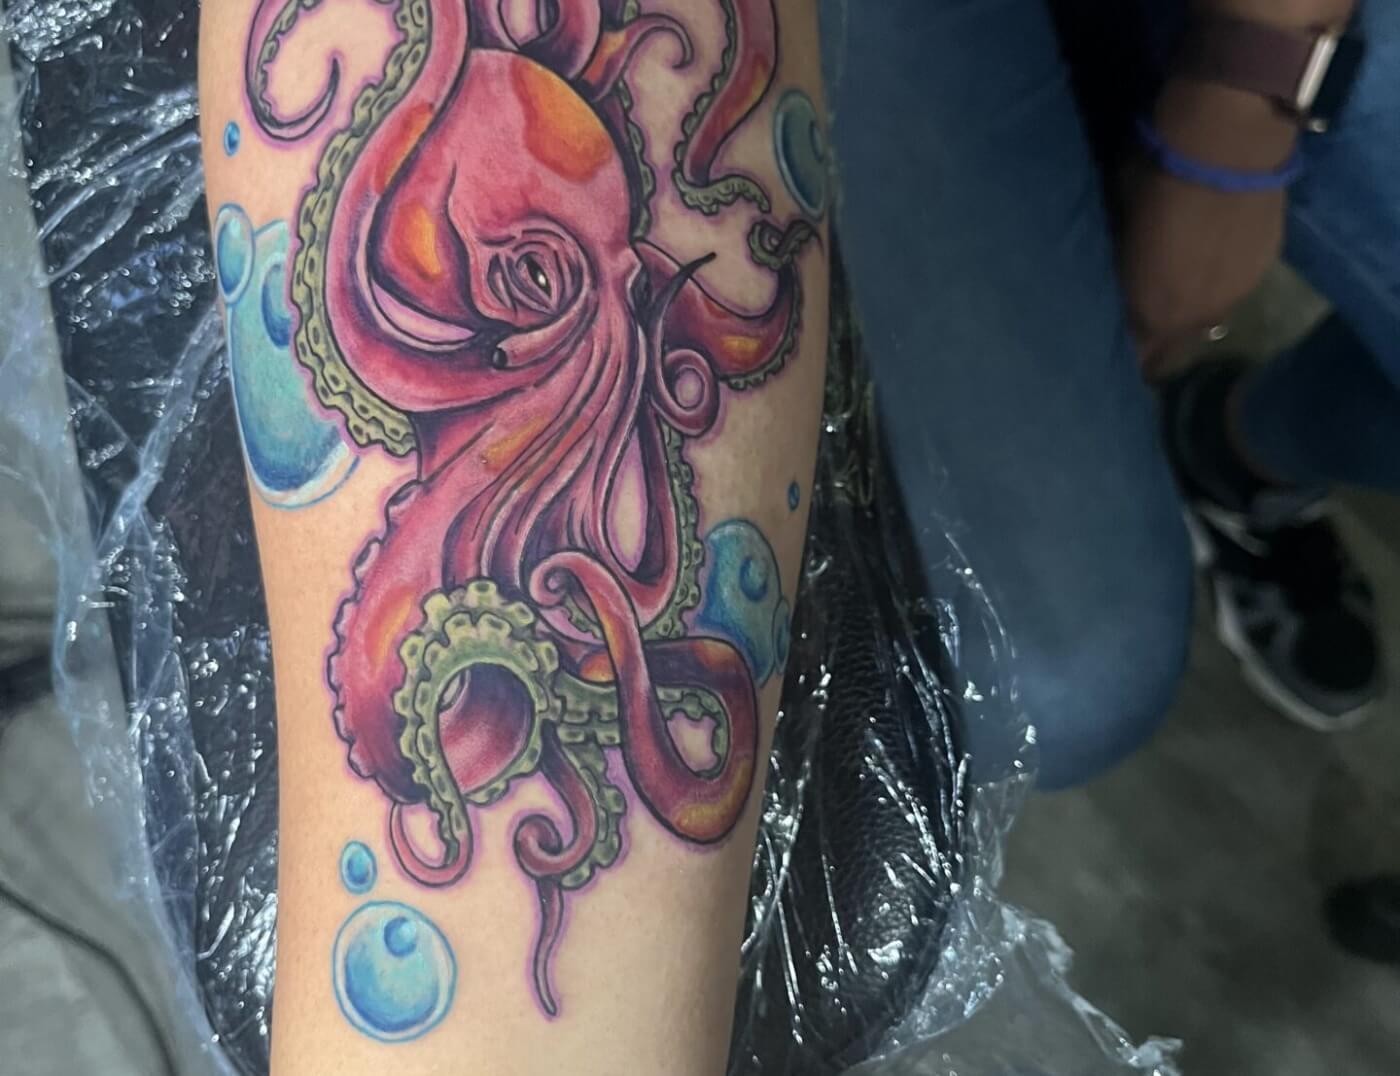 Octopus colored animal tattoo by Paper Airplane Jane at Iron Palm Tattoos & Body Piercing in downtown Atlanta, GA. We're open late night until 2AM during the week. Call 404-973-7828 or stop by for a free consultation.